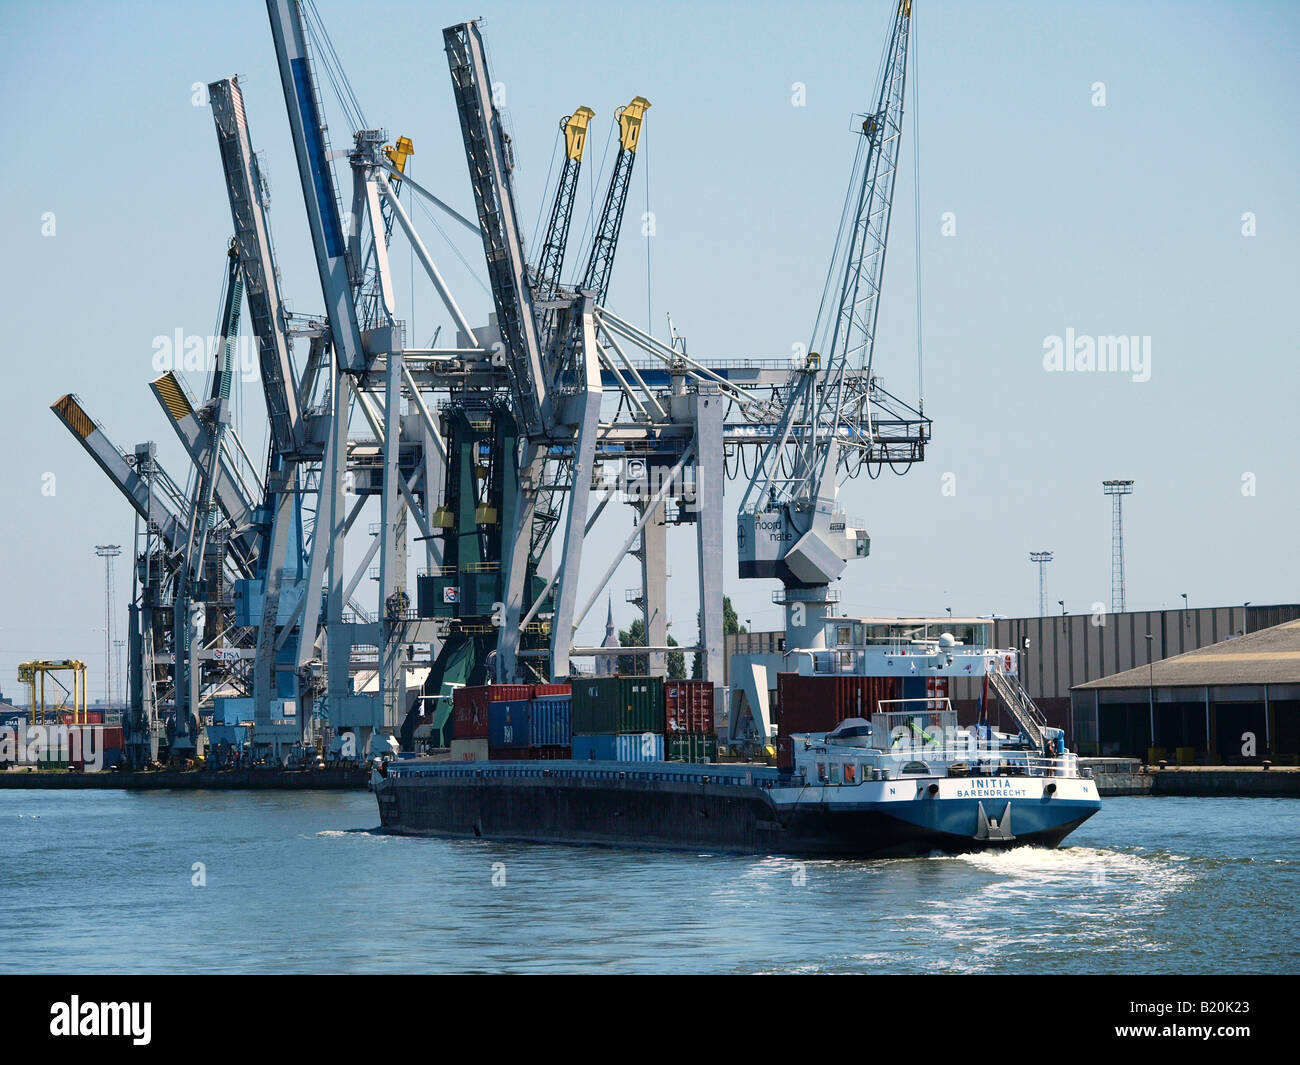 Dutch barge loaded with containers sailing through the seaport of Antwerp Belgium Stock Photo